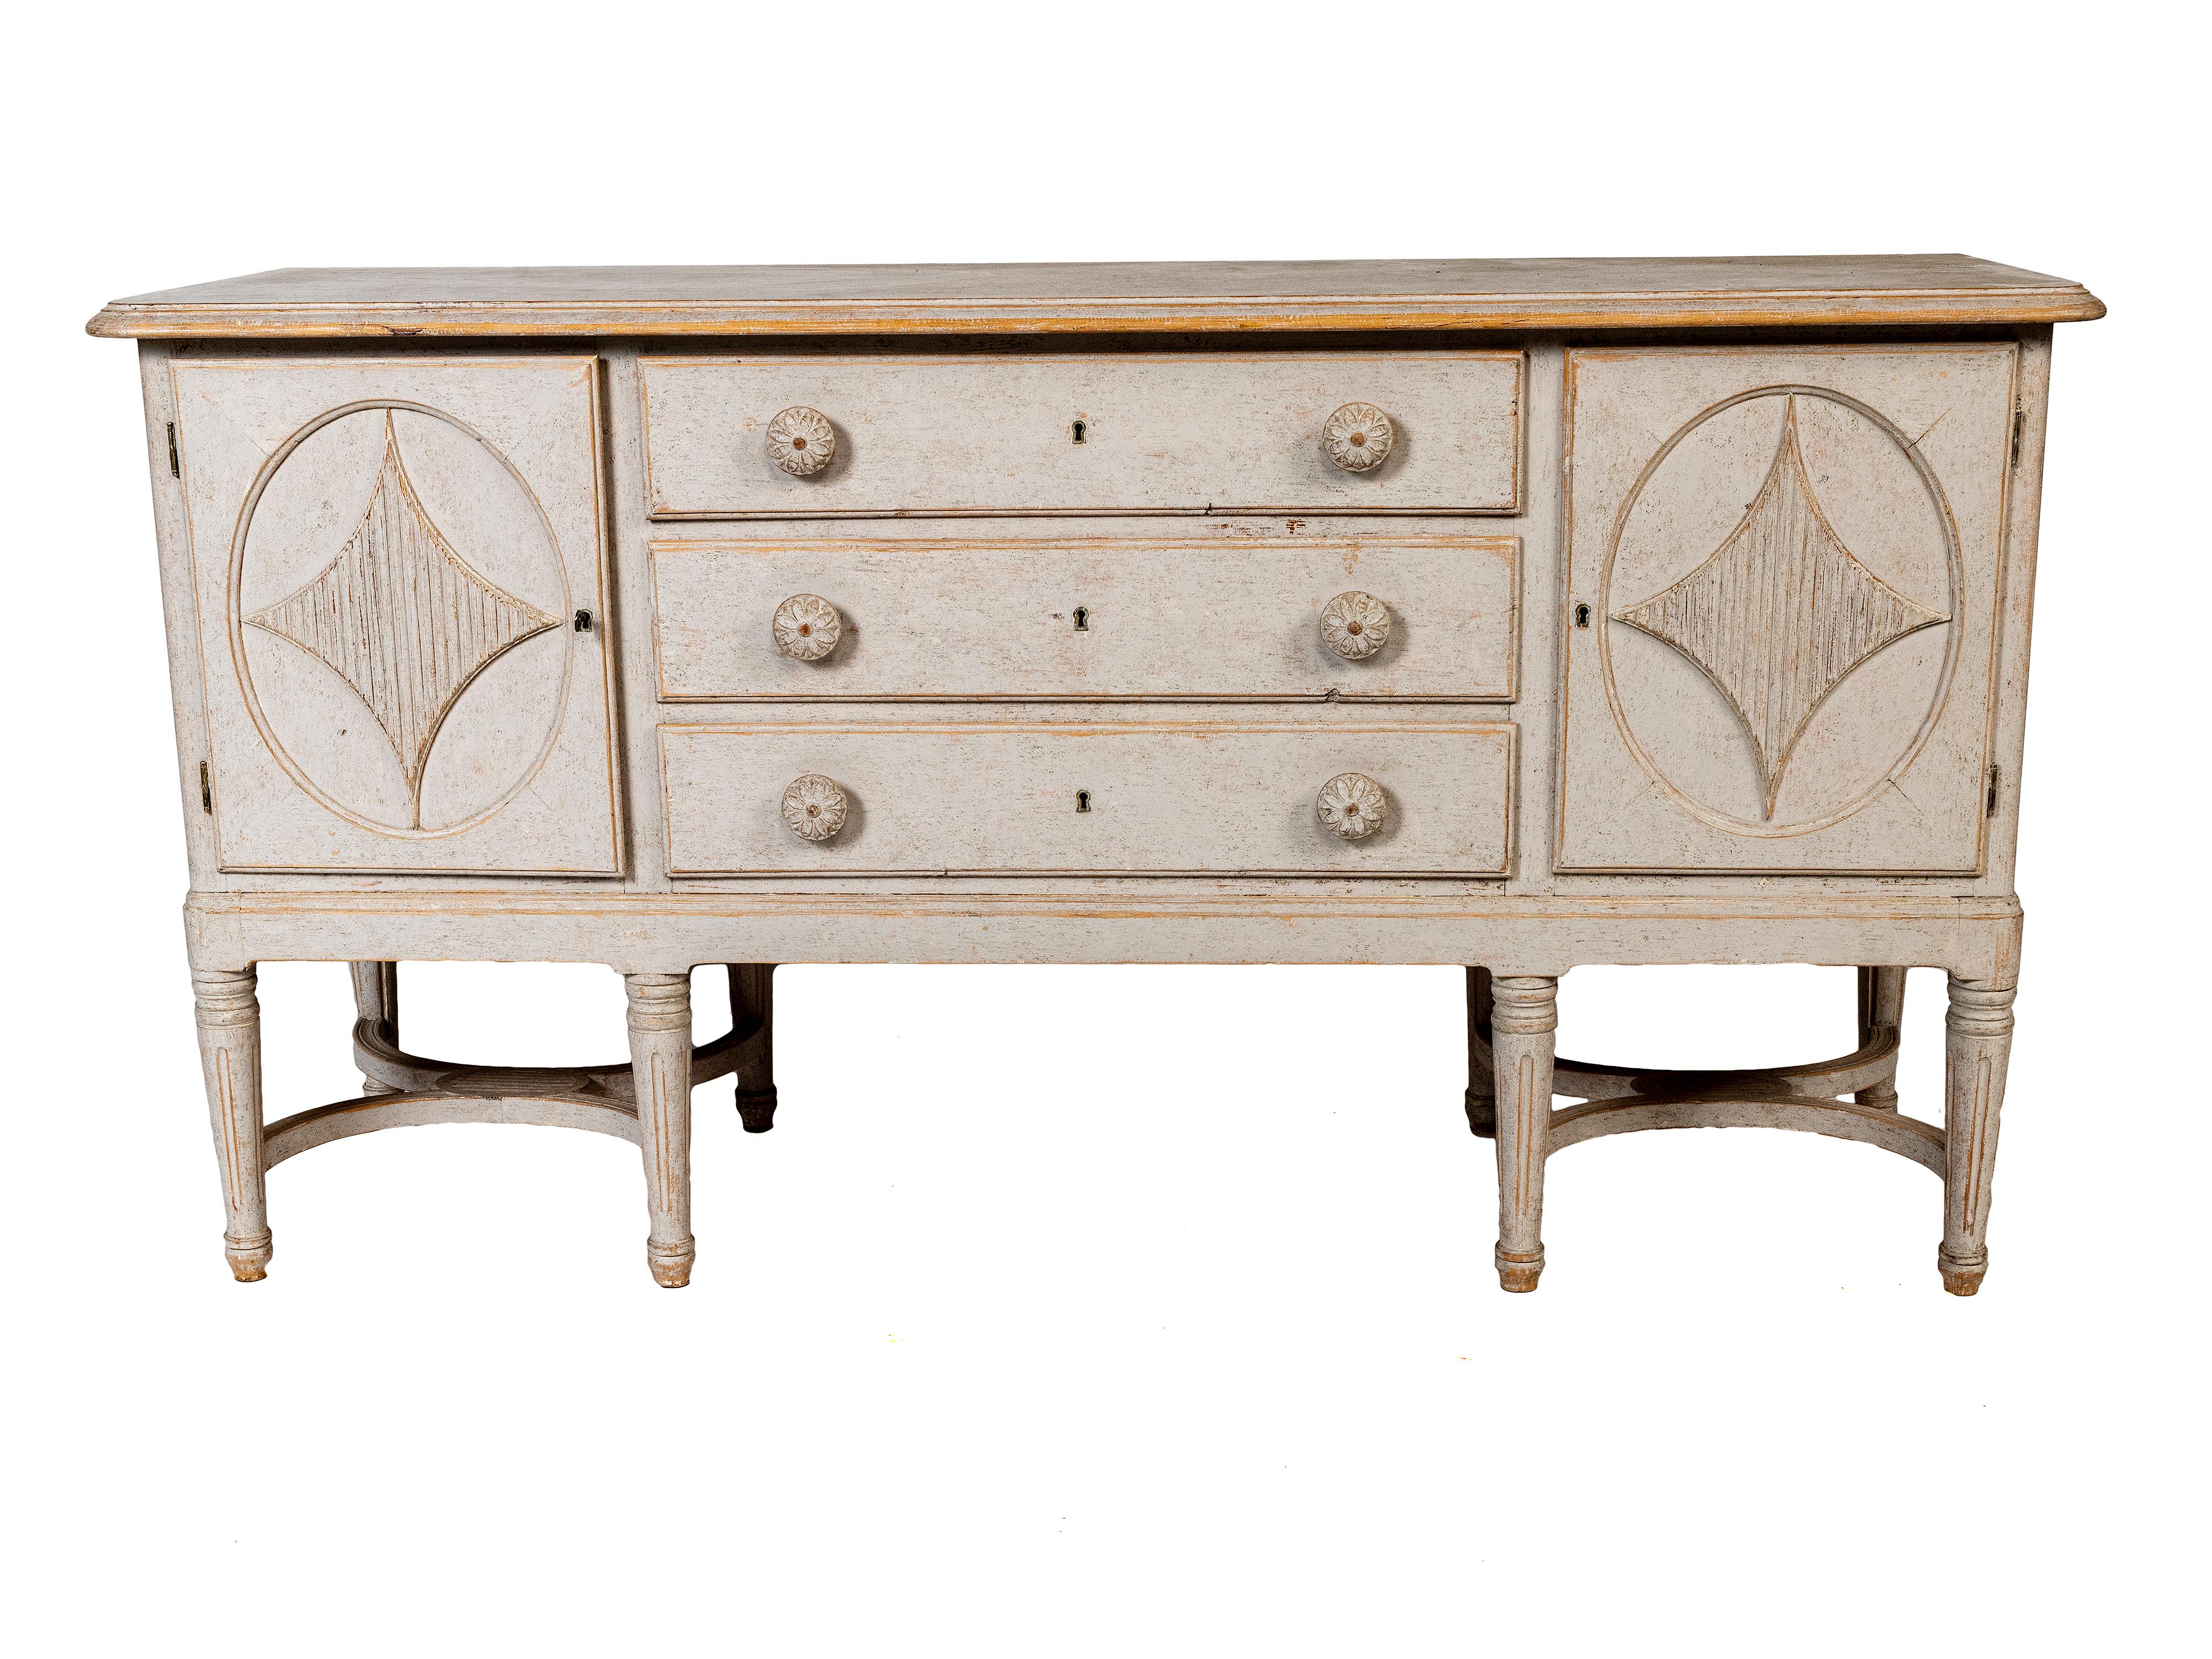 A Swedish Gustavian pine sideboard server with traditional carved fluted diamond panel motif on both of the two doors.  Tapered fluted feet.

This Swedish Gustavian style sideboard, dating back to circa 1880, is a splendid example of classic